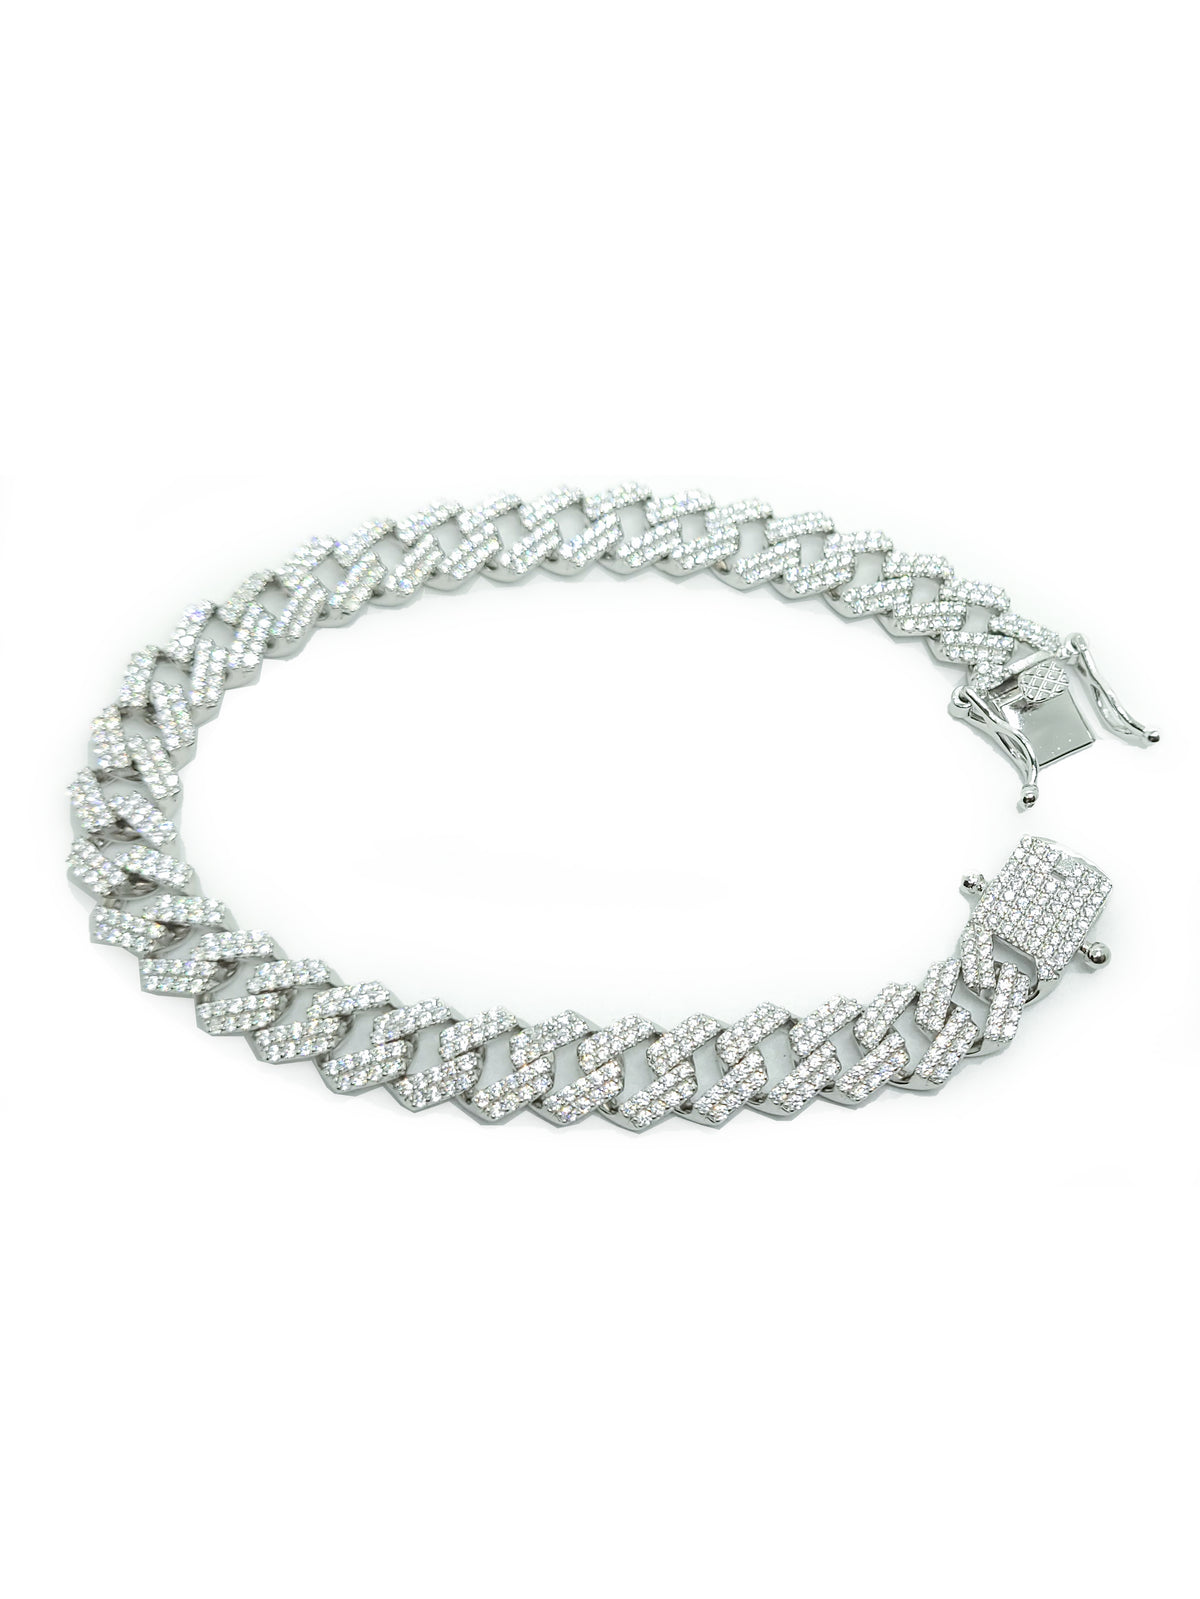 Cuban Bracelet 10mm Iced Out(Silver)